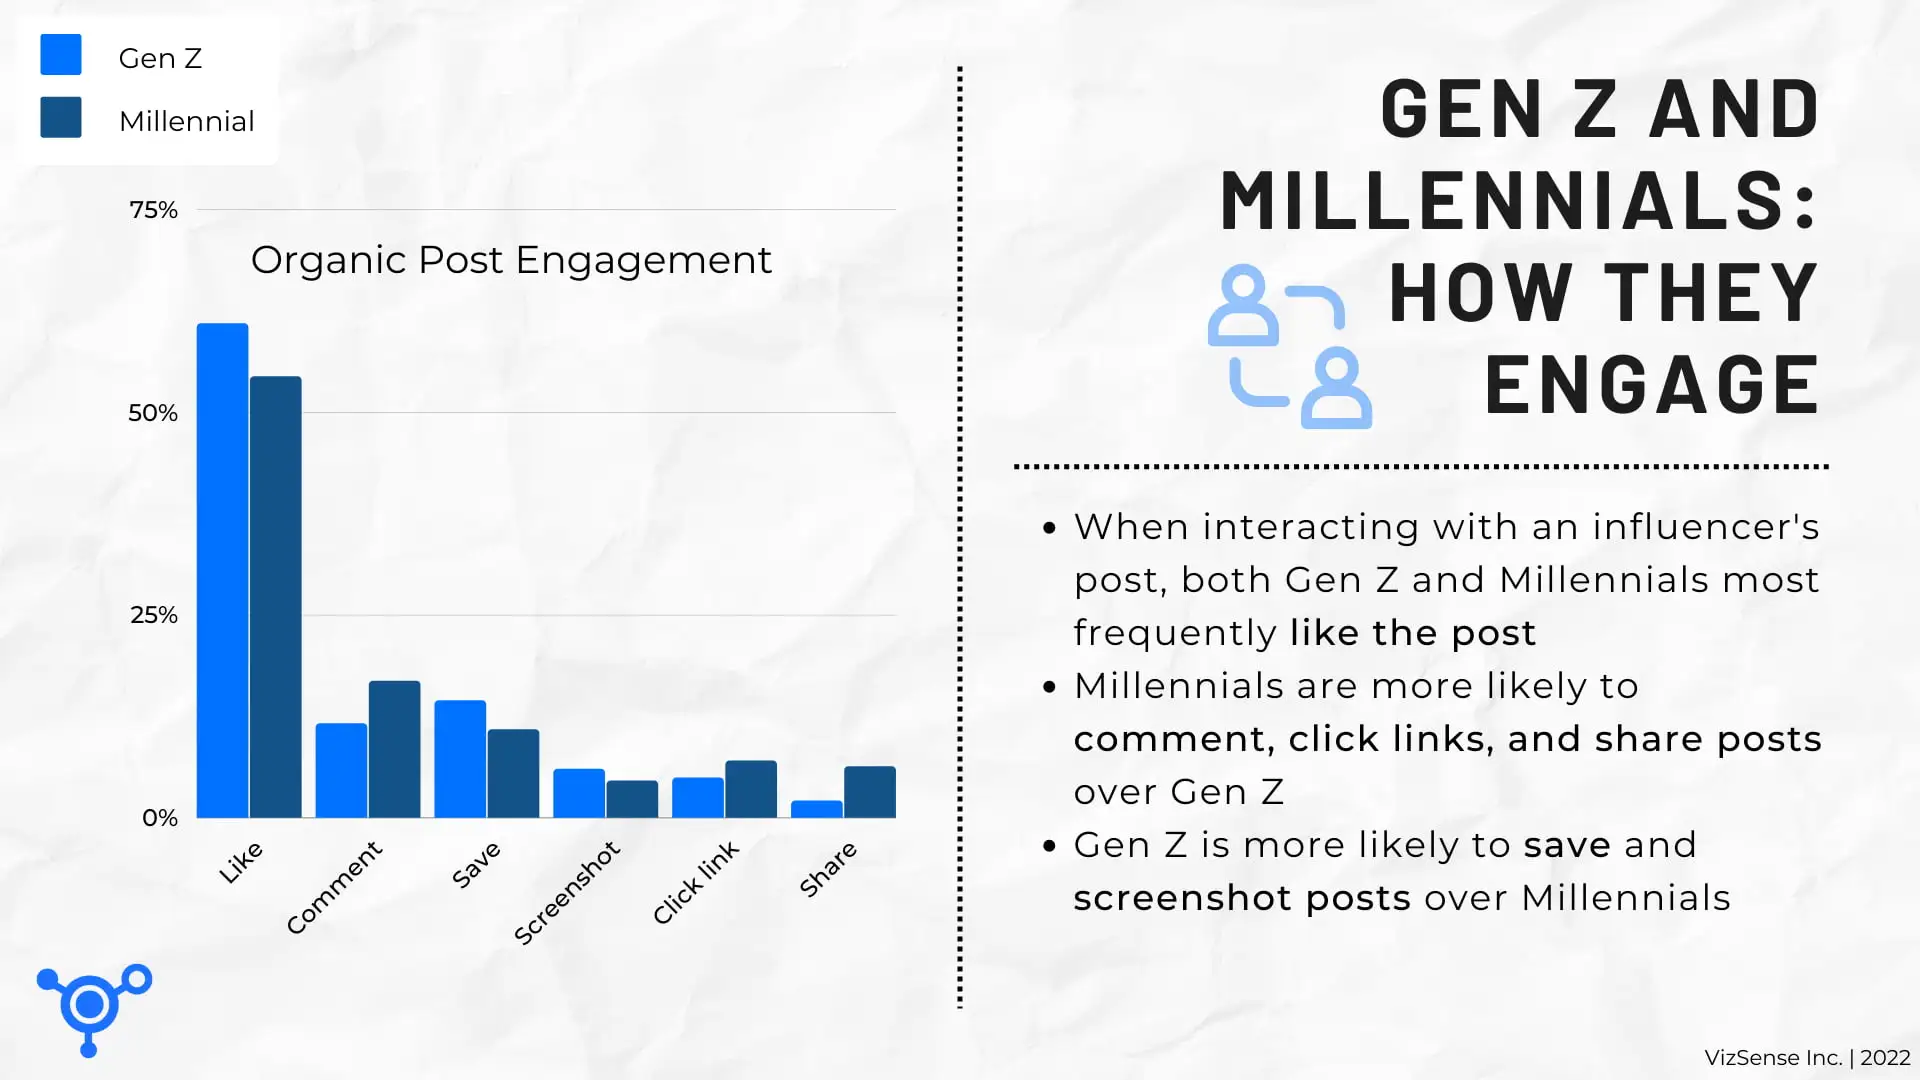 Image showing that both Millennials (54%) and Gen Z (61%) overwhelmingly prefer to interact on social media using likes vs comments, saves, screenshots, link clicks, and shares.